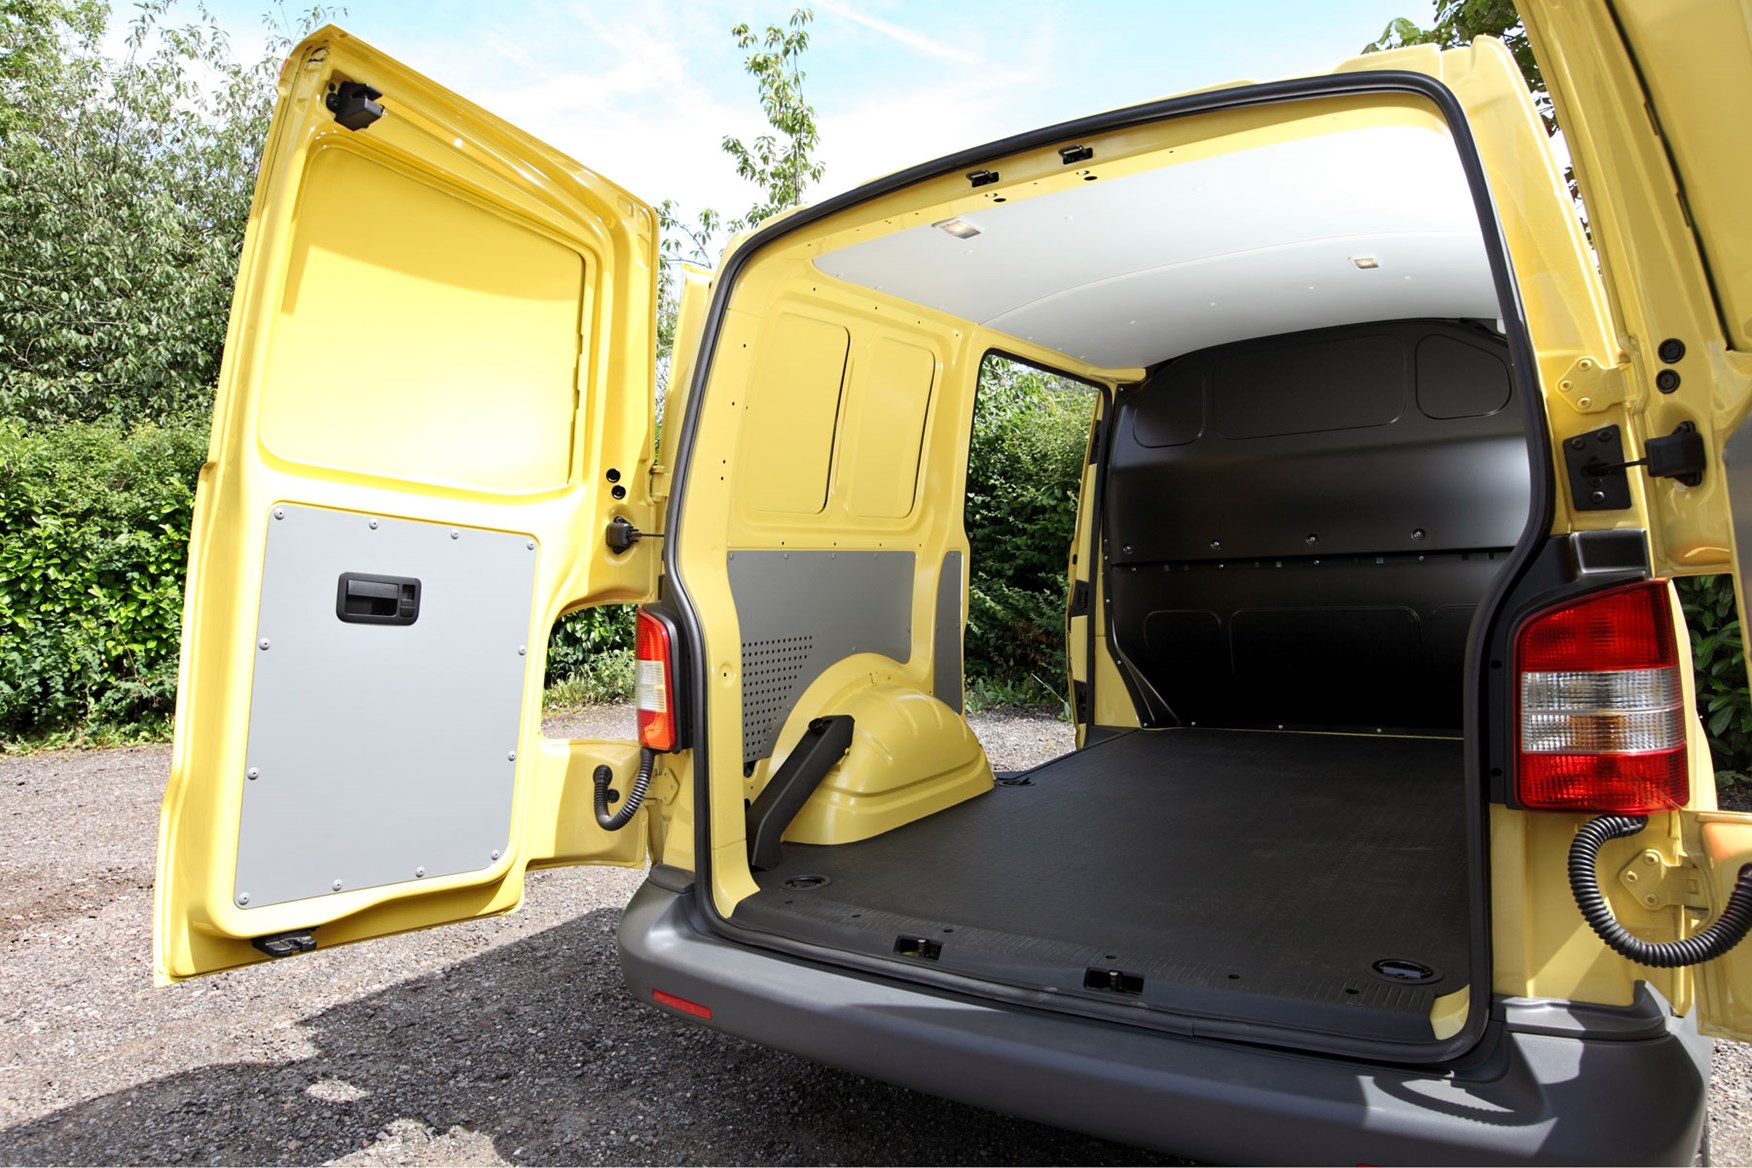 VW Transporter T5 (2010-2015) payload and load area